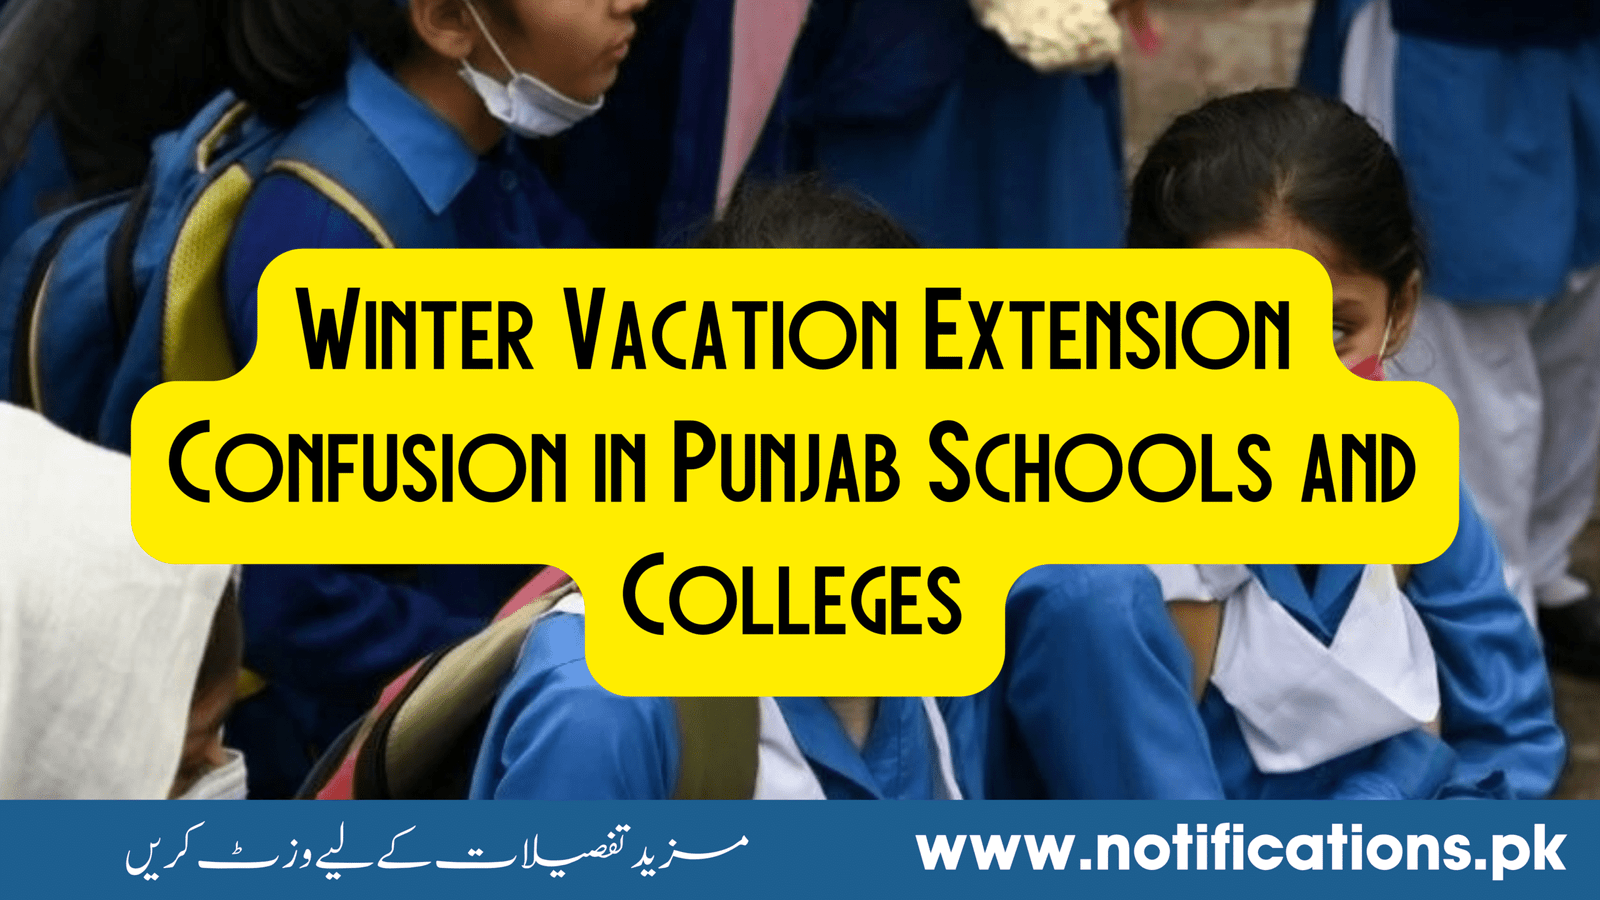 Winter Vacation Extension Confusion in Punjab Schools and Colleges